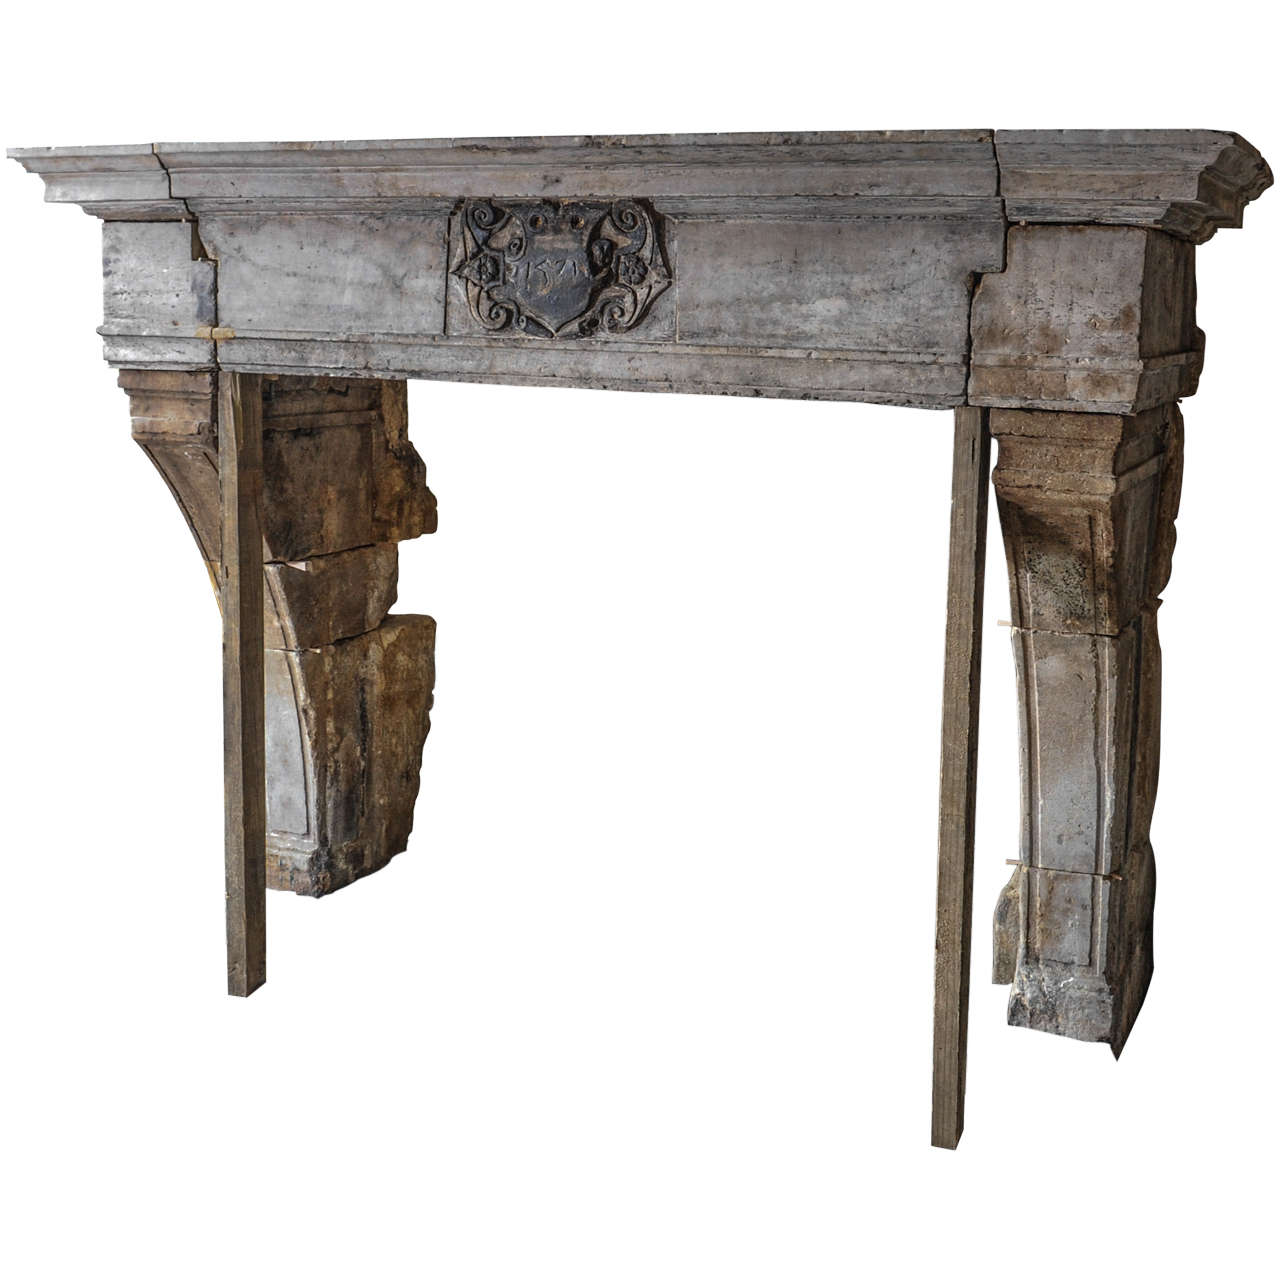 Spectacular 16th Century French Castle Fireplace from Hard French Stone